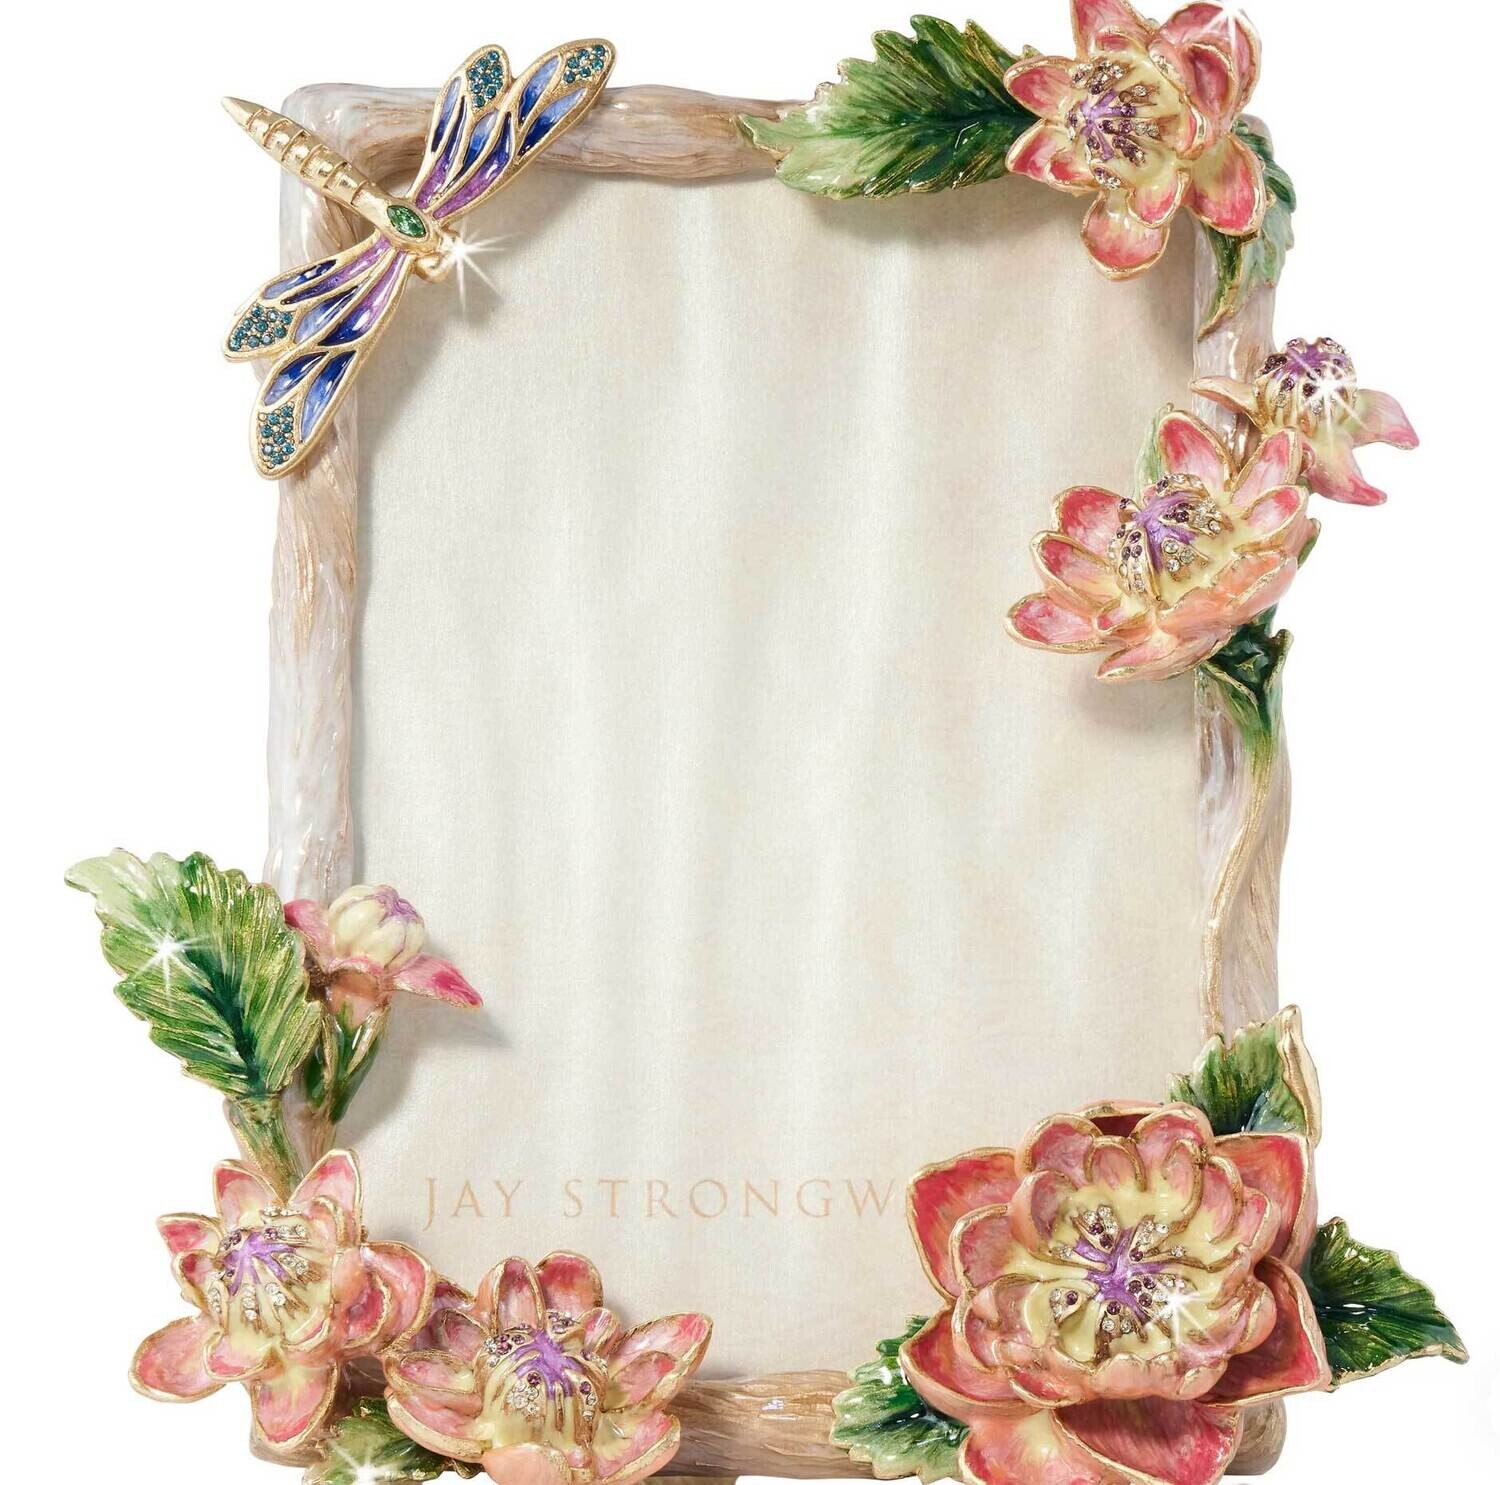 Jay Strongwater Danika 5 x 7 Inch Dahlia Picture Frame SPF5902-256